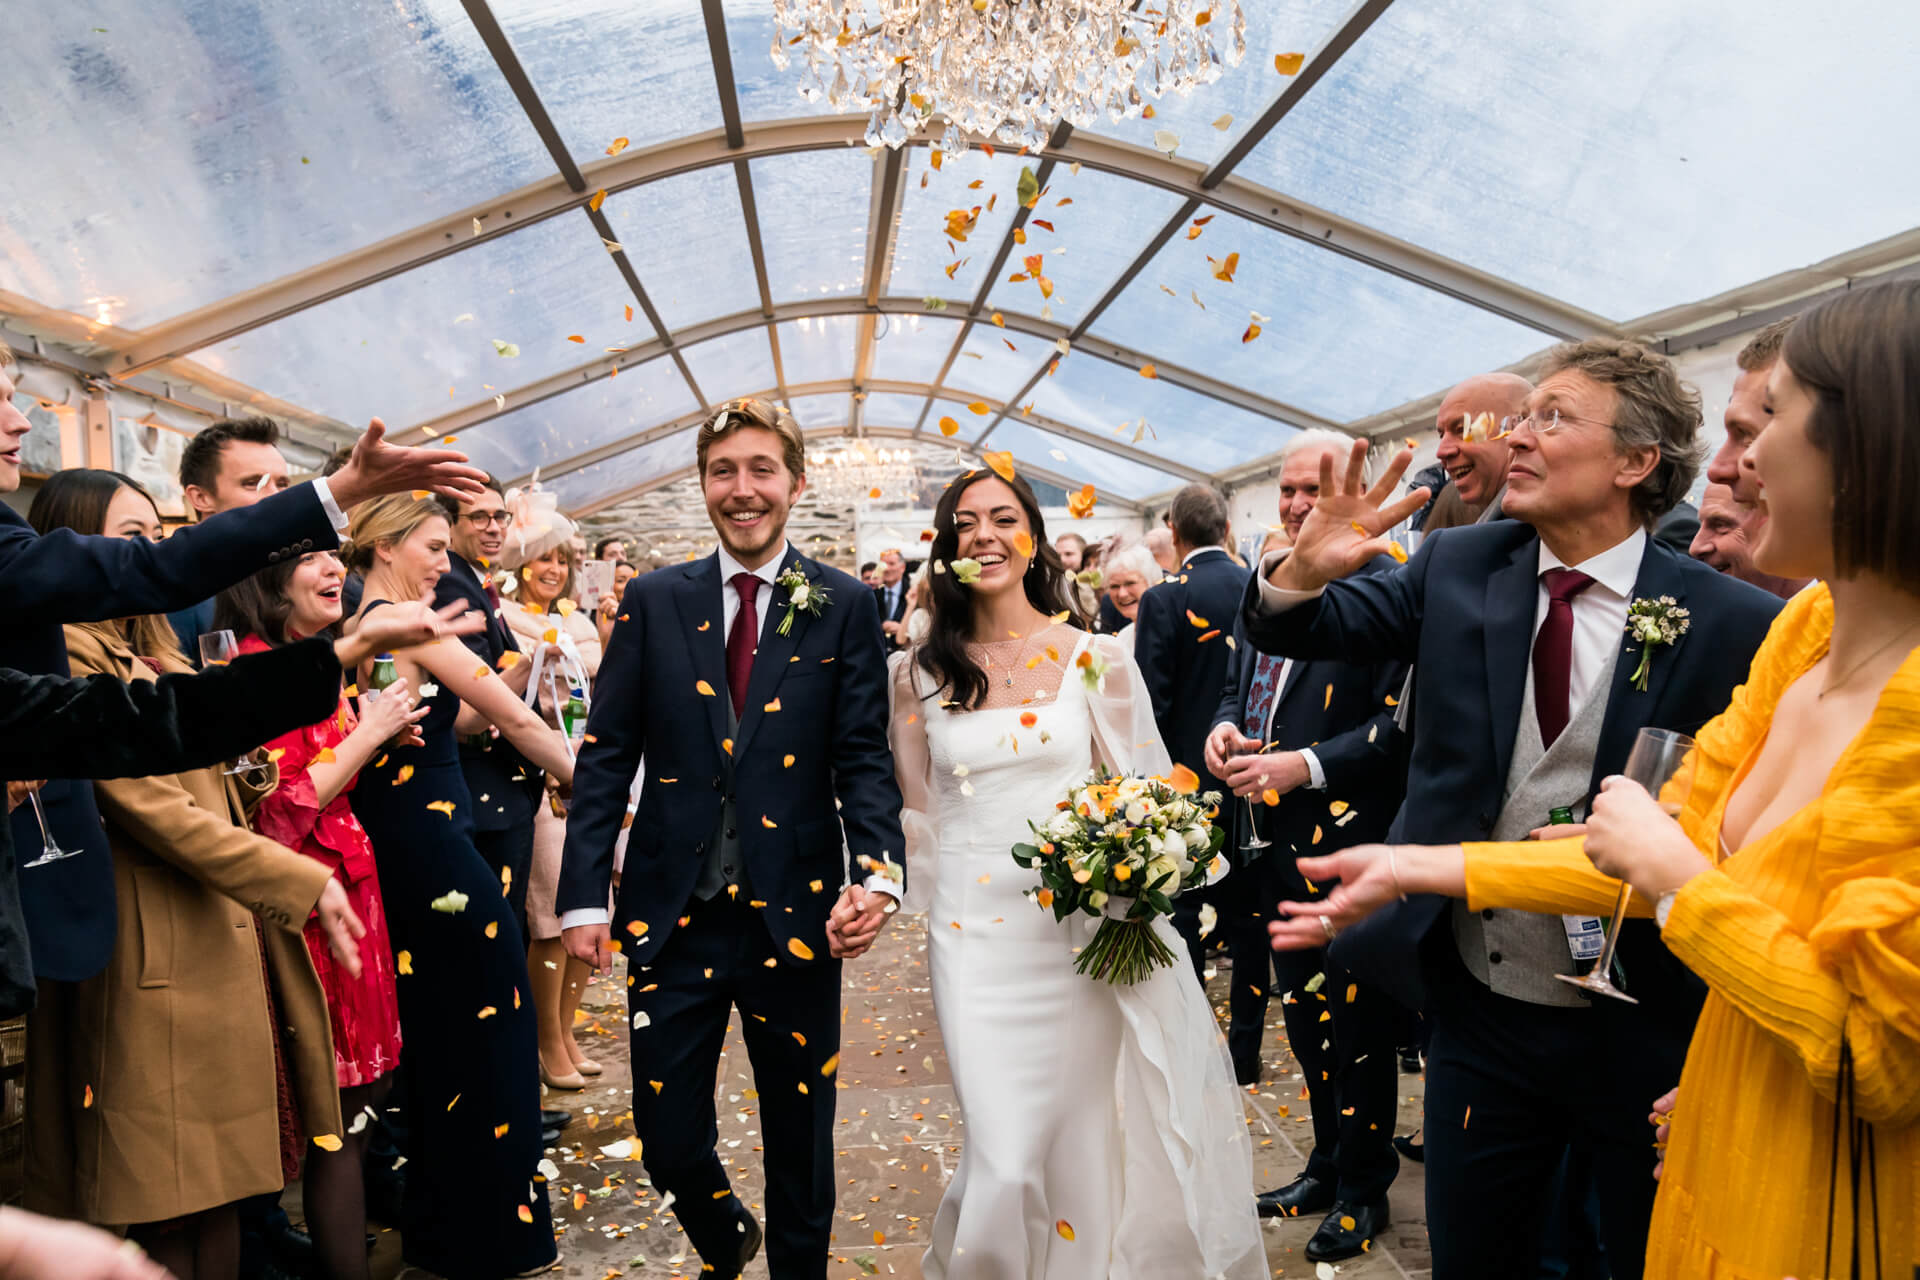 wedding guests through confetti over the couple at the town head estate